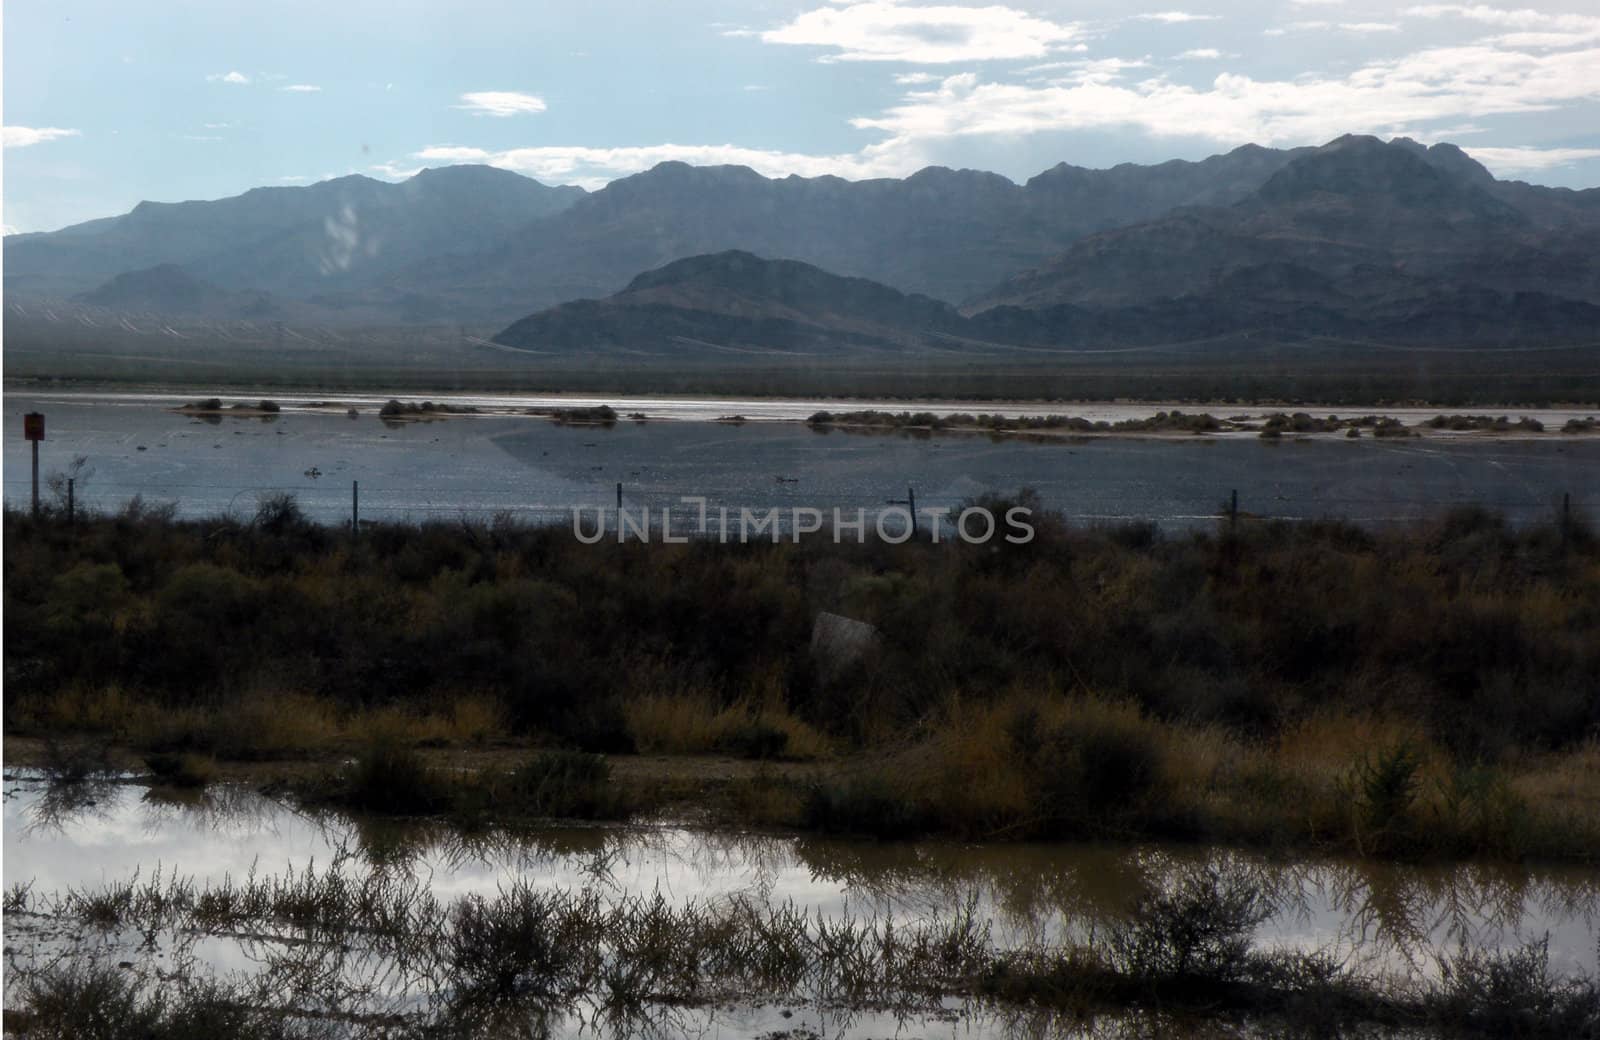 mountains reflected by photosbyrob